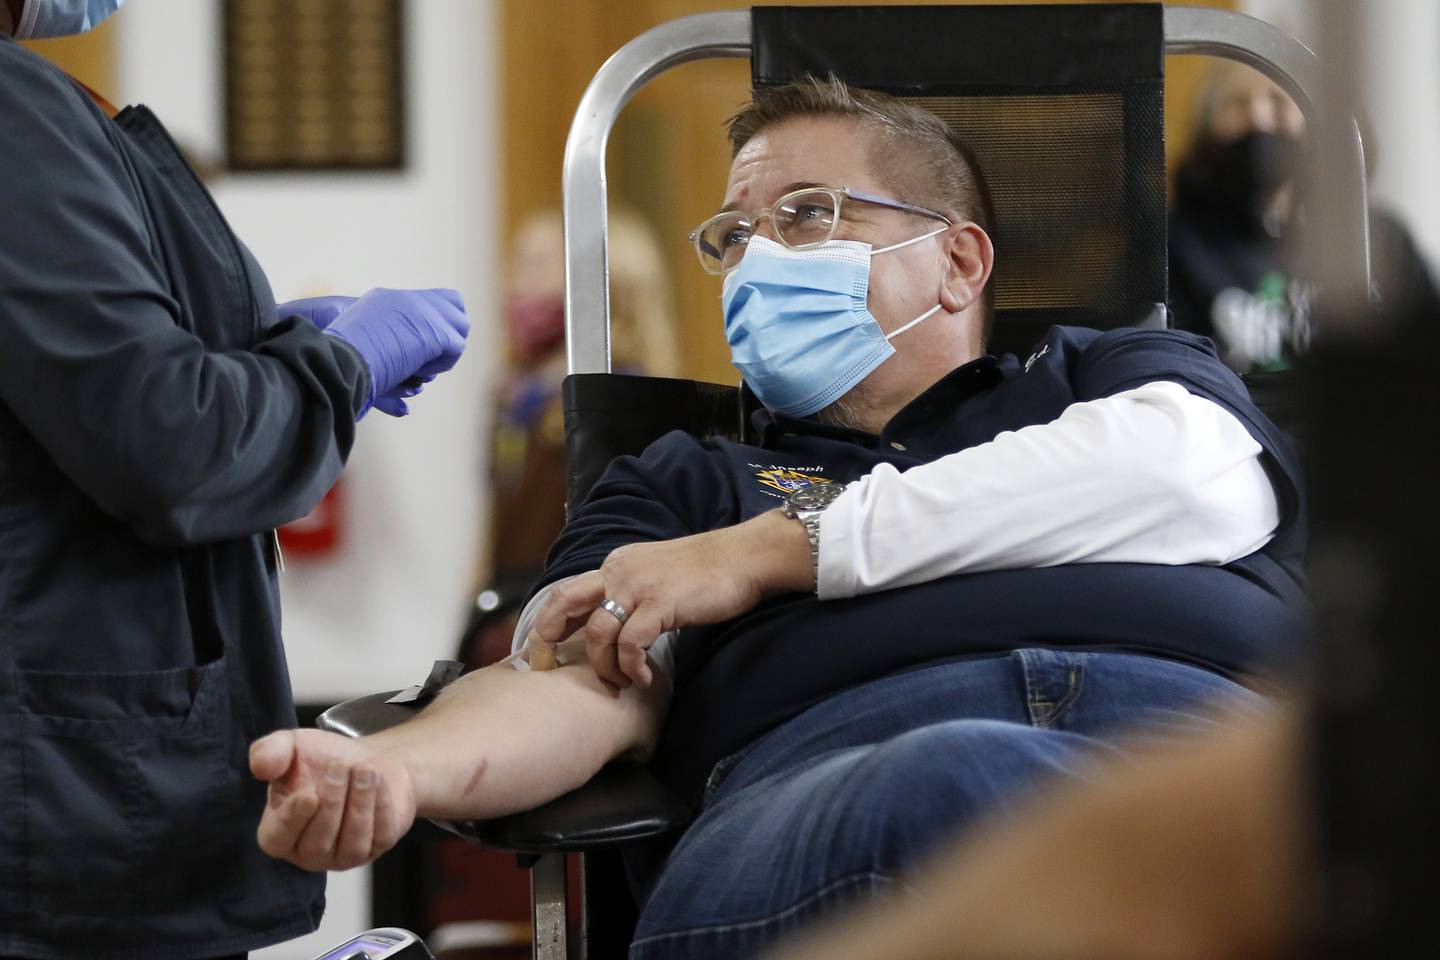 Edward Varga, of Richmond, has blood drawn by phlebotomist Katrina White during a Versiti blood drive hosted by the Knights of Columbus and Girl Scouts on Saturday, Nov. 20, 2021 at St. Joseph's Catholic Church in Richmond. A shortage in the blood supply has again resurged and blood drives are hopeful for donors.